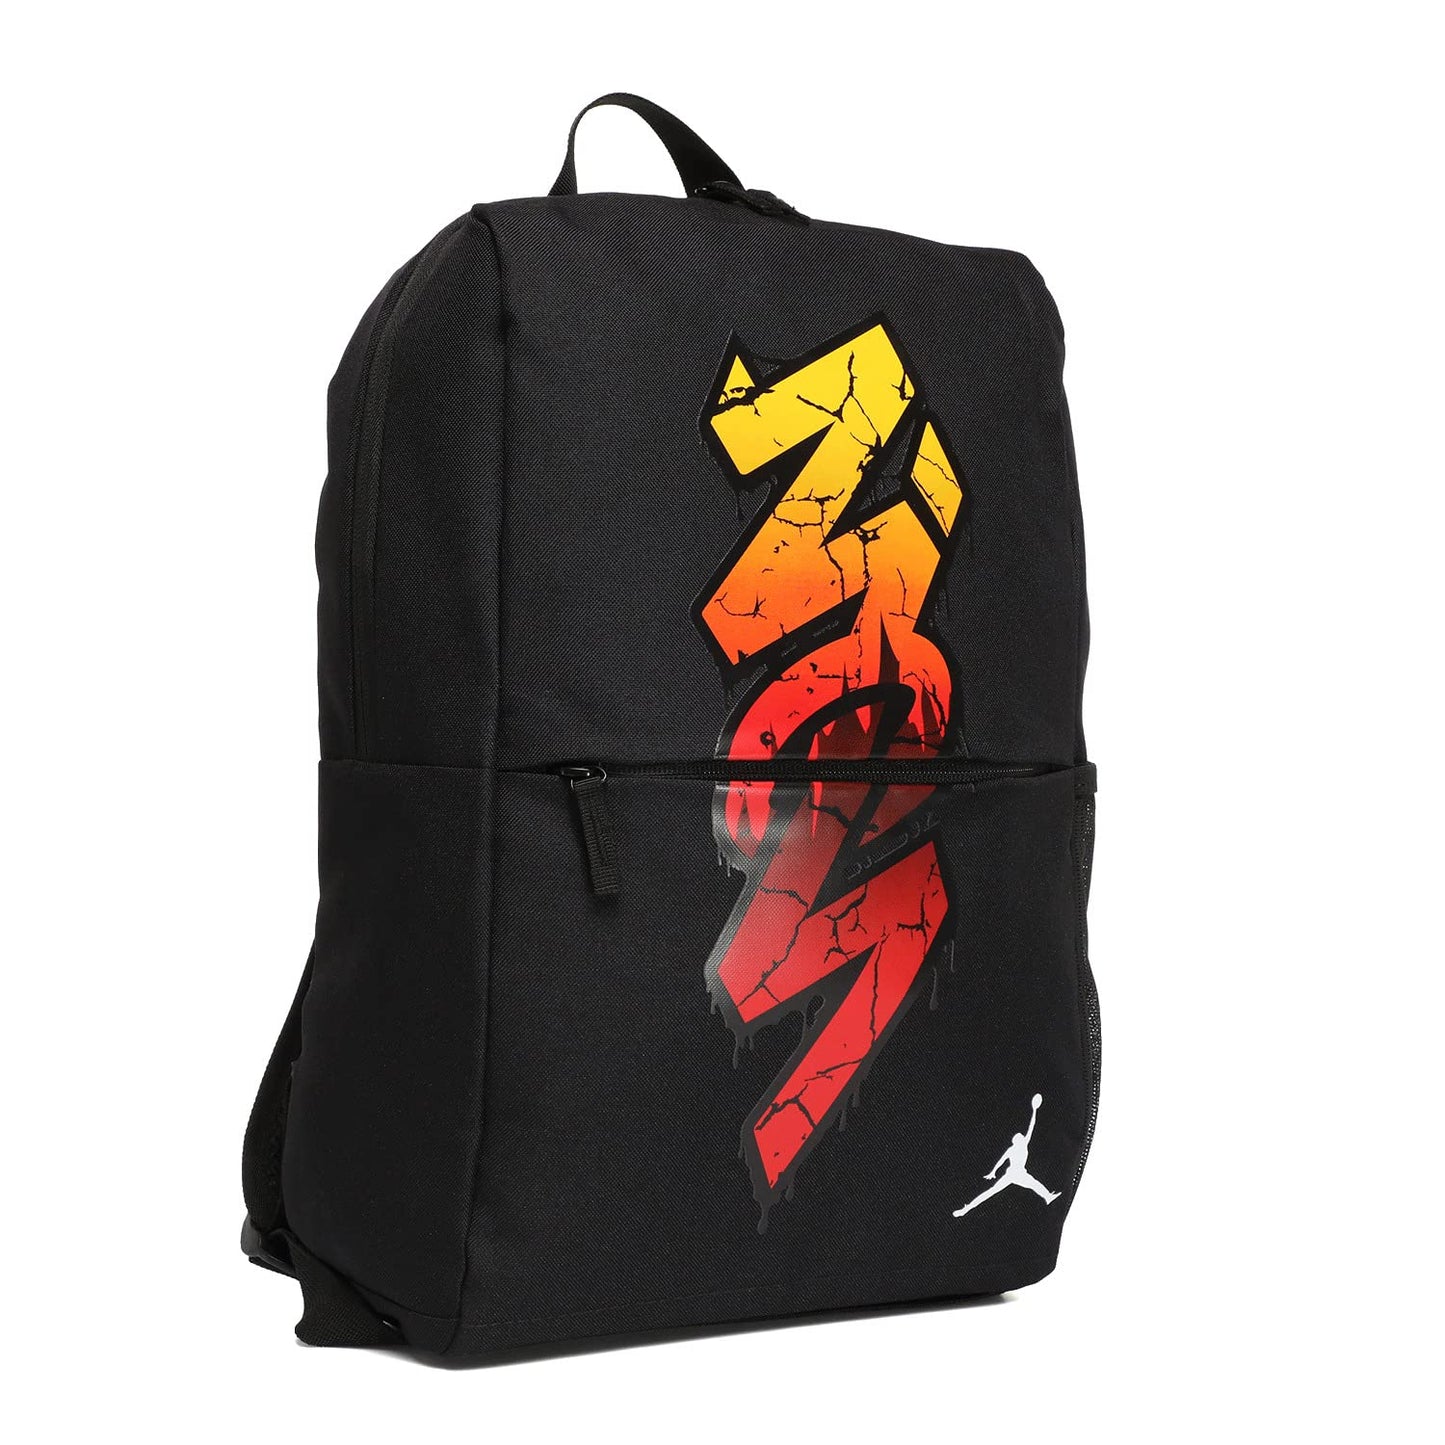 Image 1 of Zion Essentials Backpack